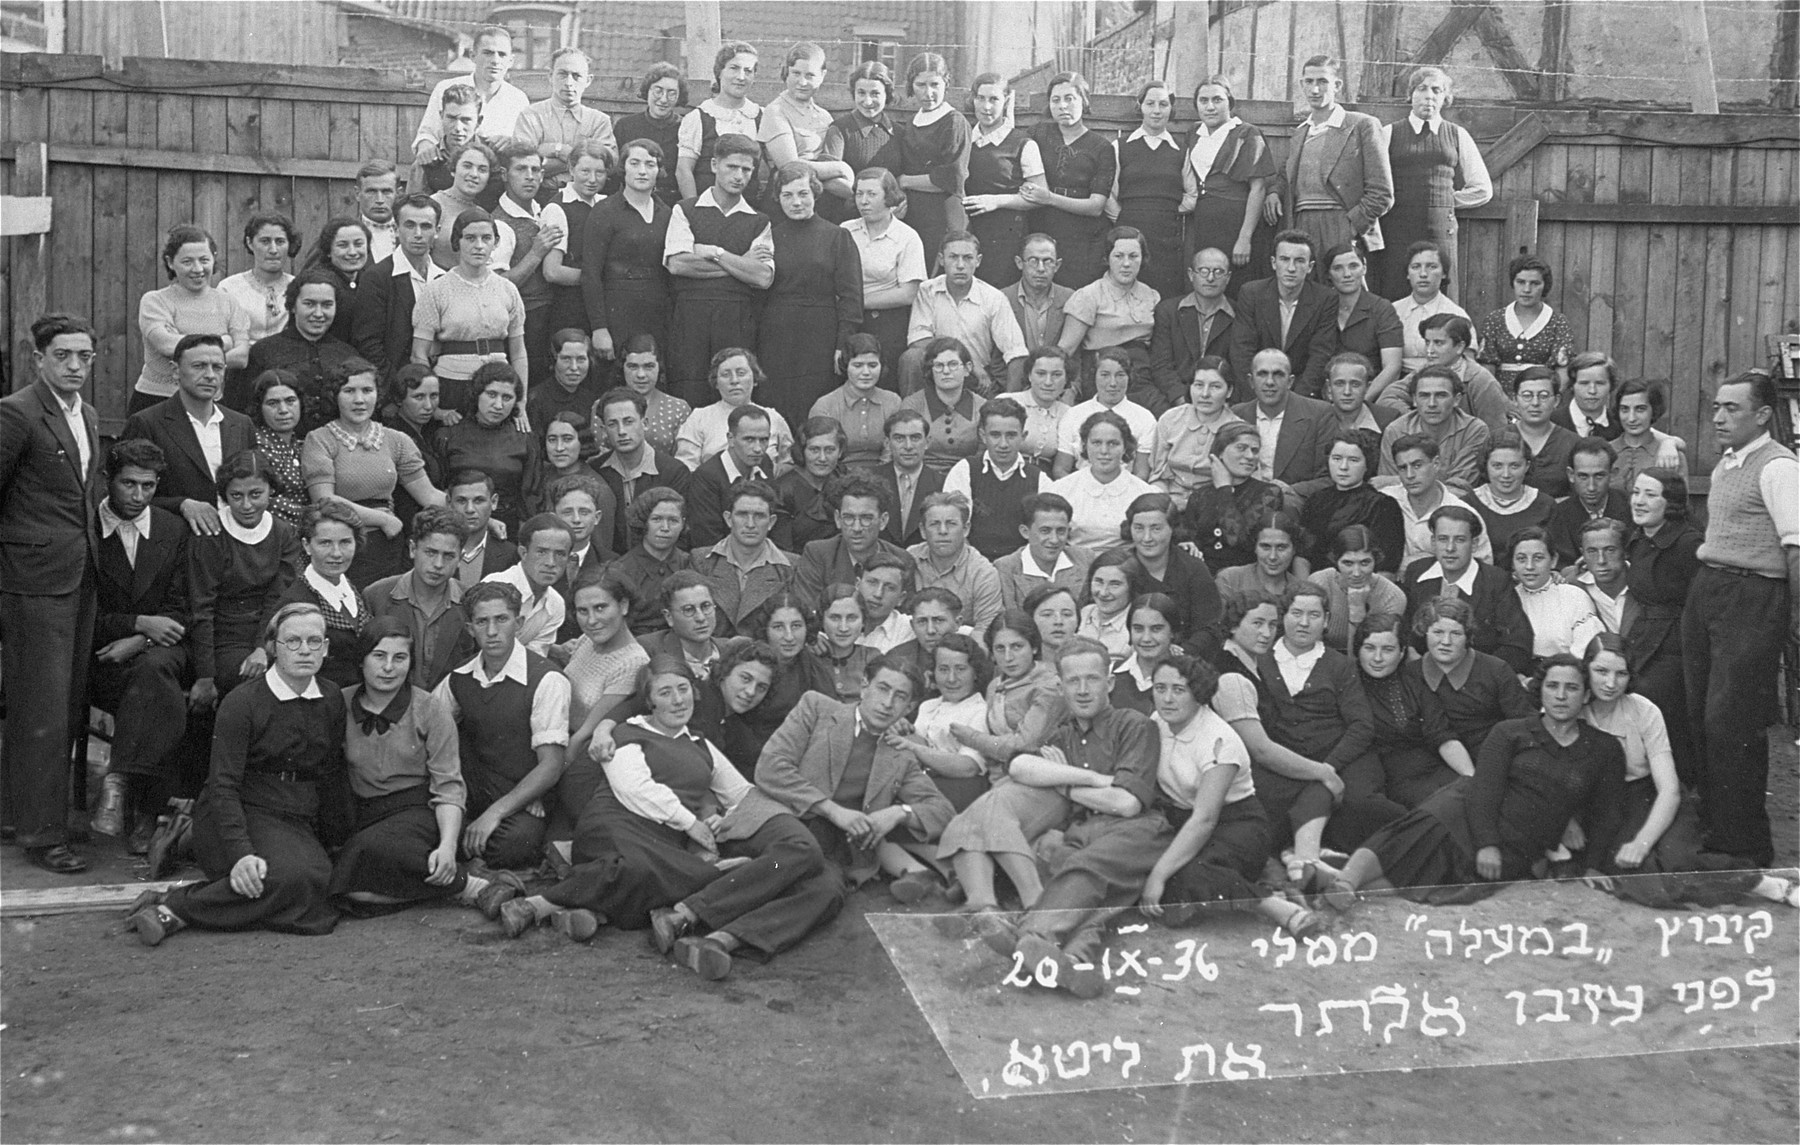 Group portrait of the kibbutz hachshara, Bemaaleh, taken on the occasion of the departure of one of its members.  

Pictured at the far left is Eliezer Kaplan, the donor's father.